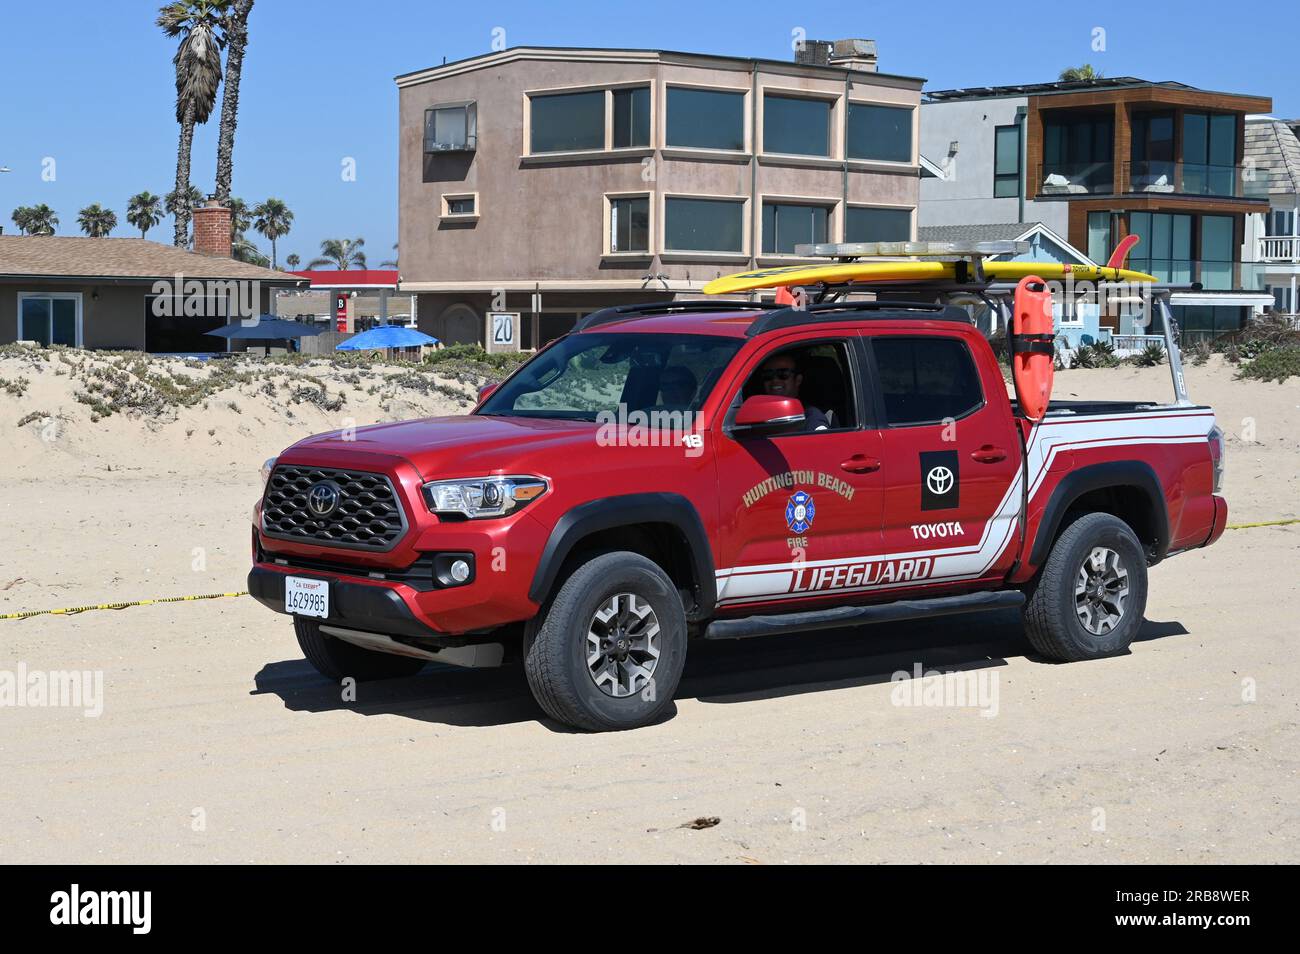 Toyota lifeguard pick up on Sunset Beach in Los Angeles. Stock Photo